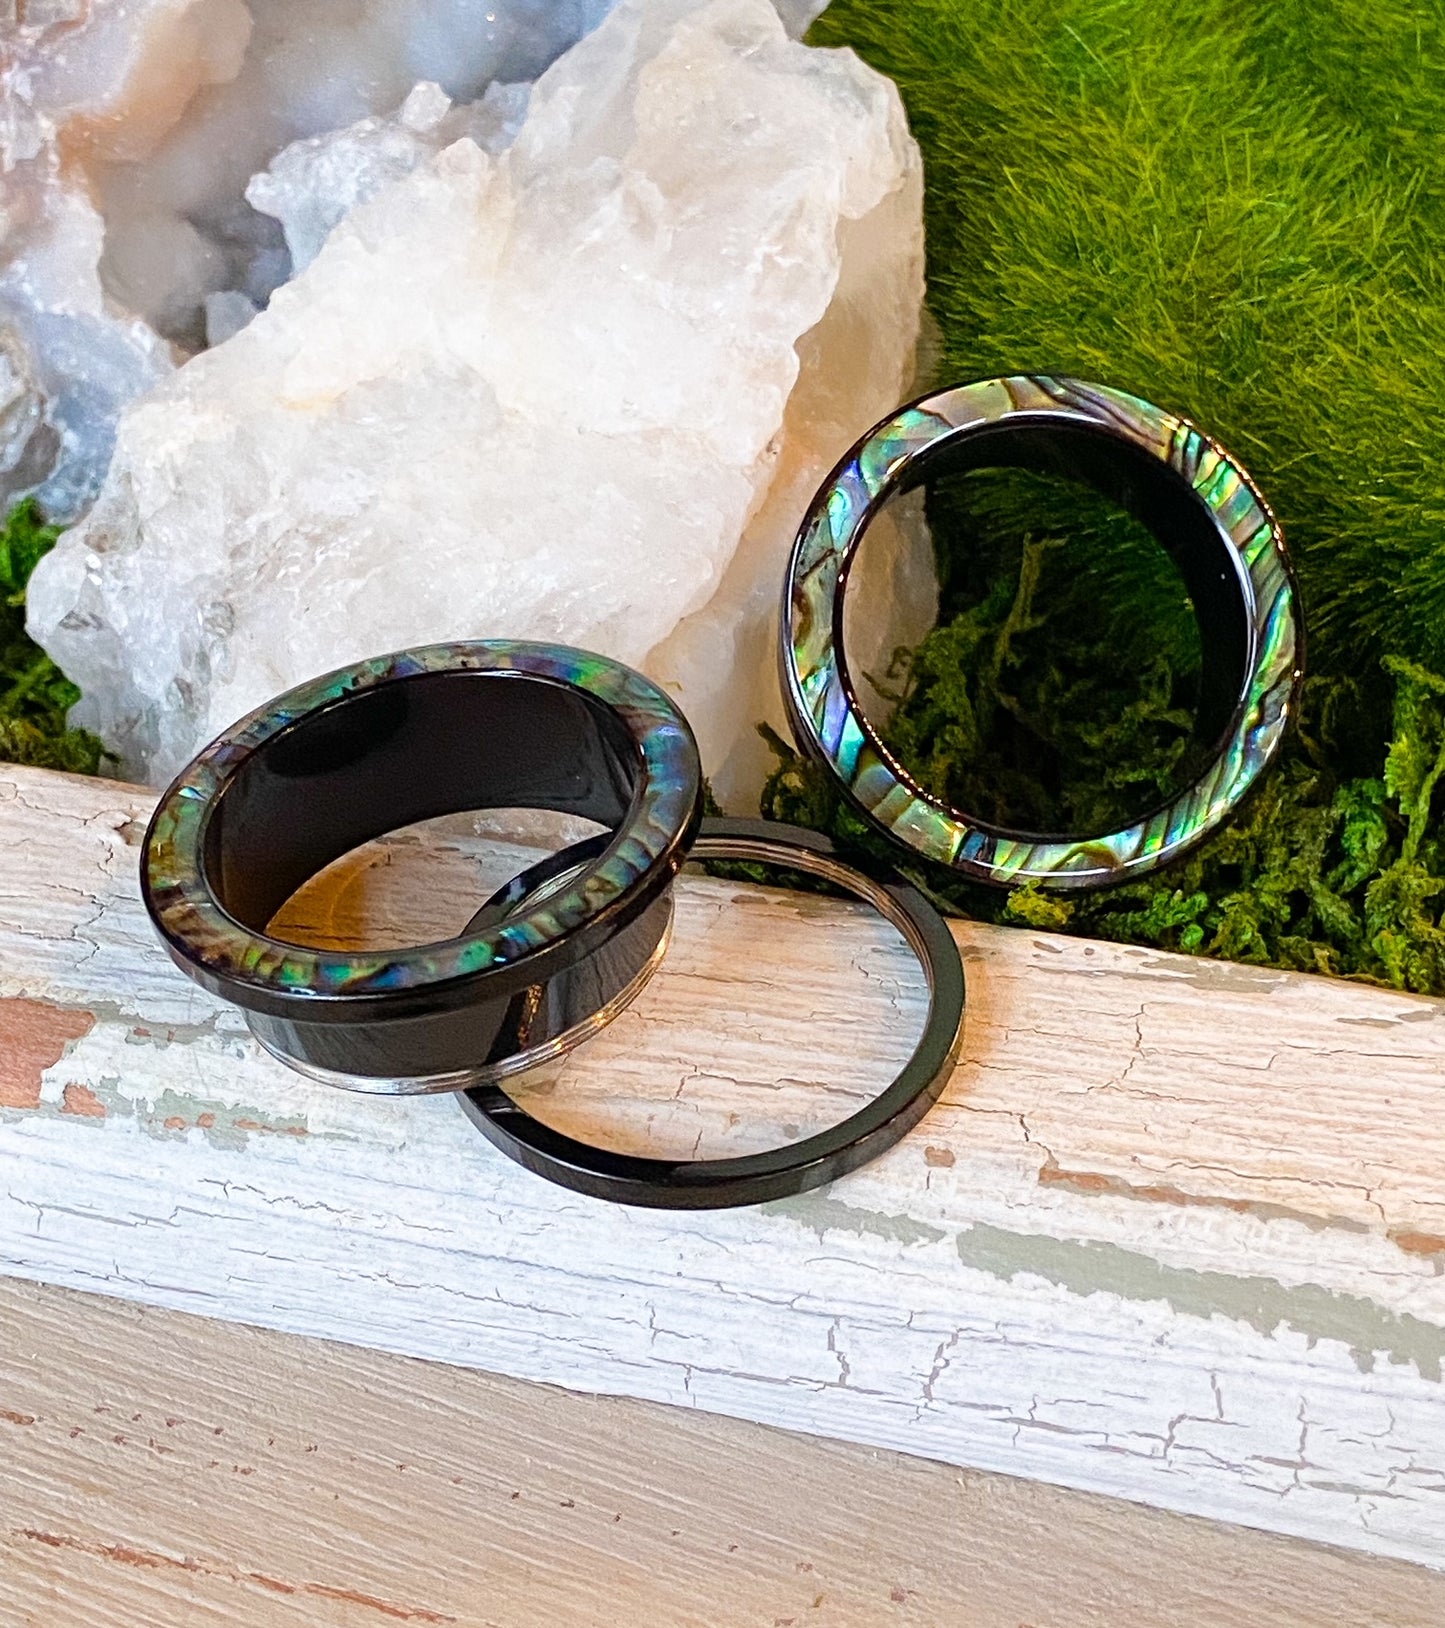 PAIR of Beautiful Abalone Rimmed Black Screw Fit Tunnels Plugs - Gauges 2g (6mm) thru 1" (25mm) available!